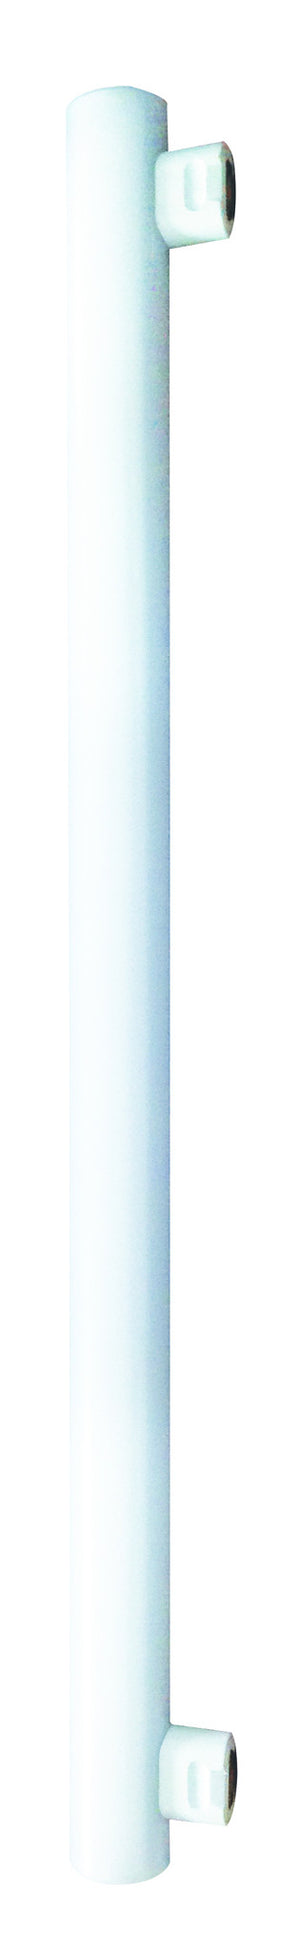 997007 - Tube Lateral LED S14S 500mm 8W 2700K 640Lm GS TUBE The Lampco - The Lamp Company